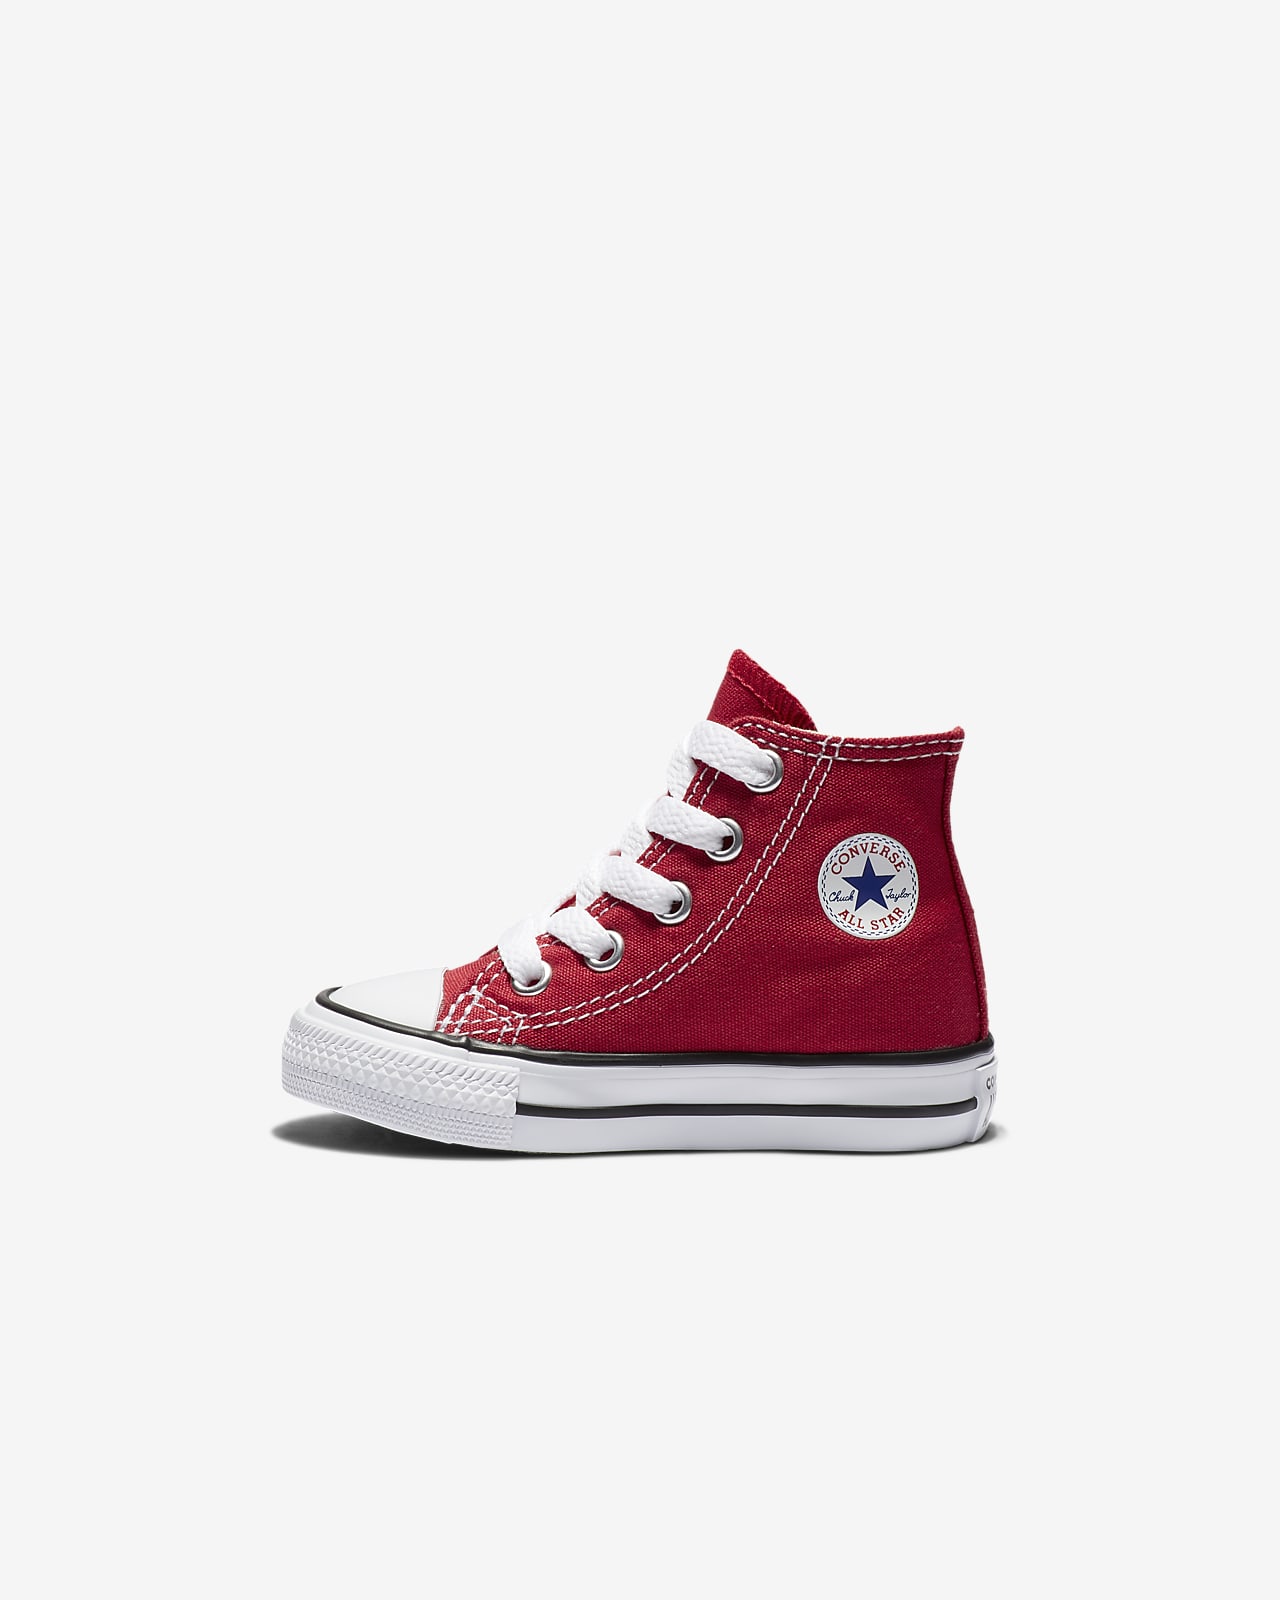 Converse Chuck Taylor All Star High Top (2c-10c) Infant/Toddler Shoe. Nike .com